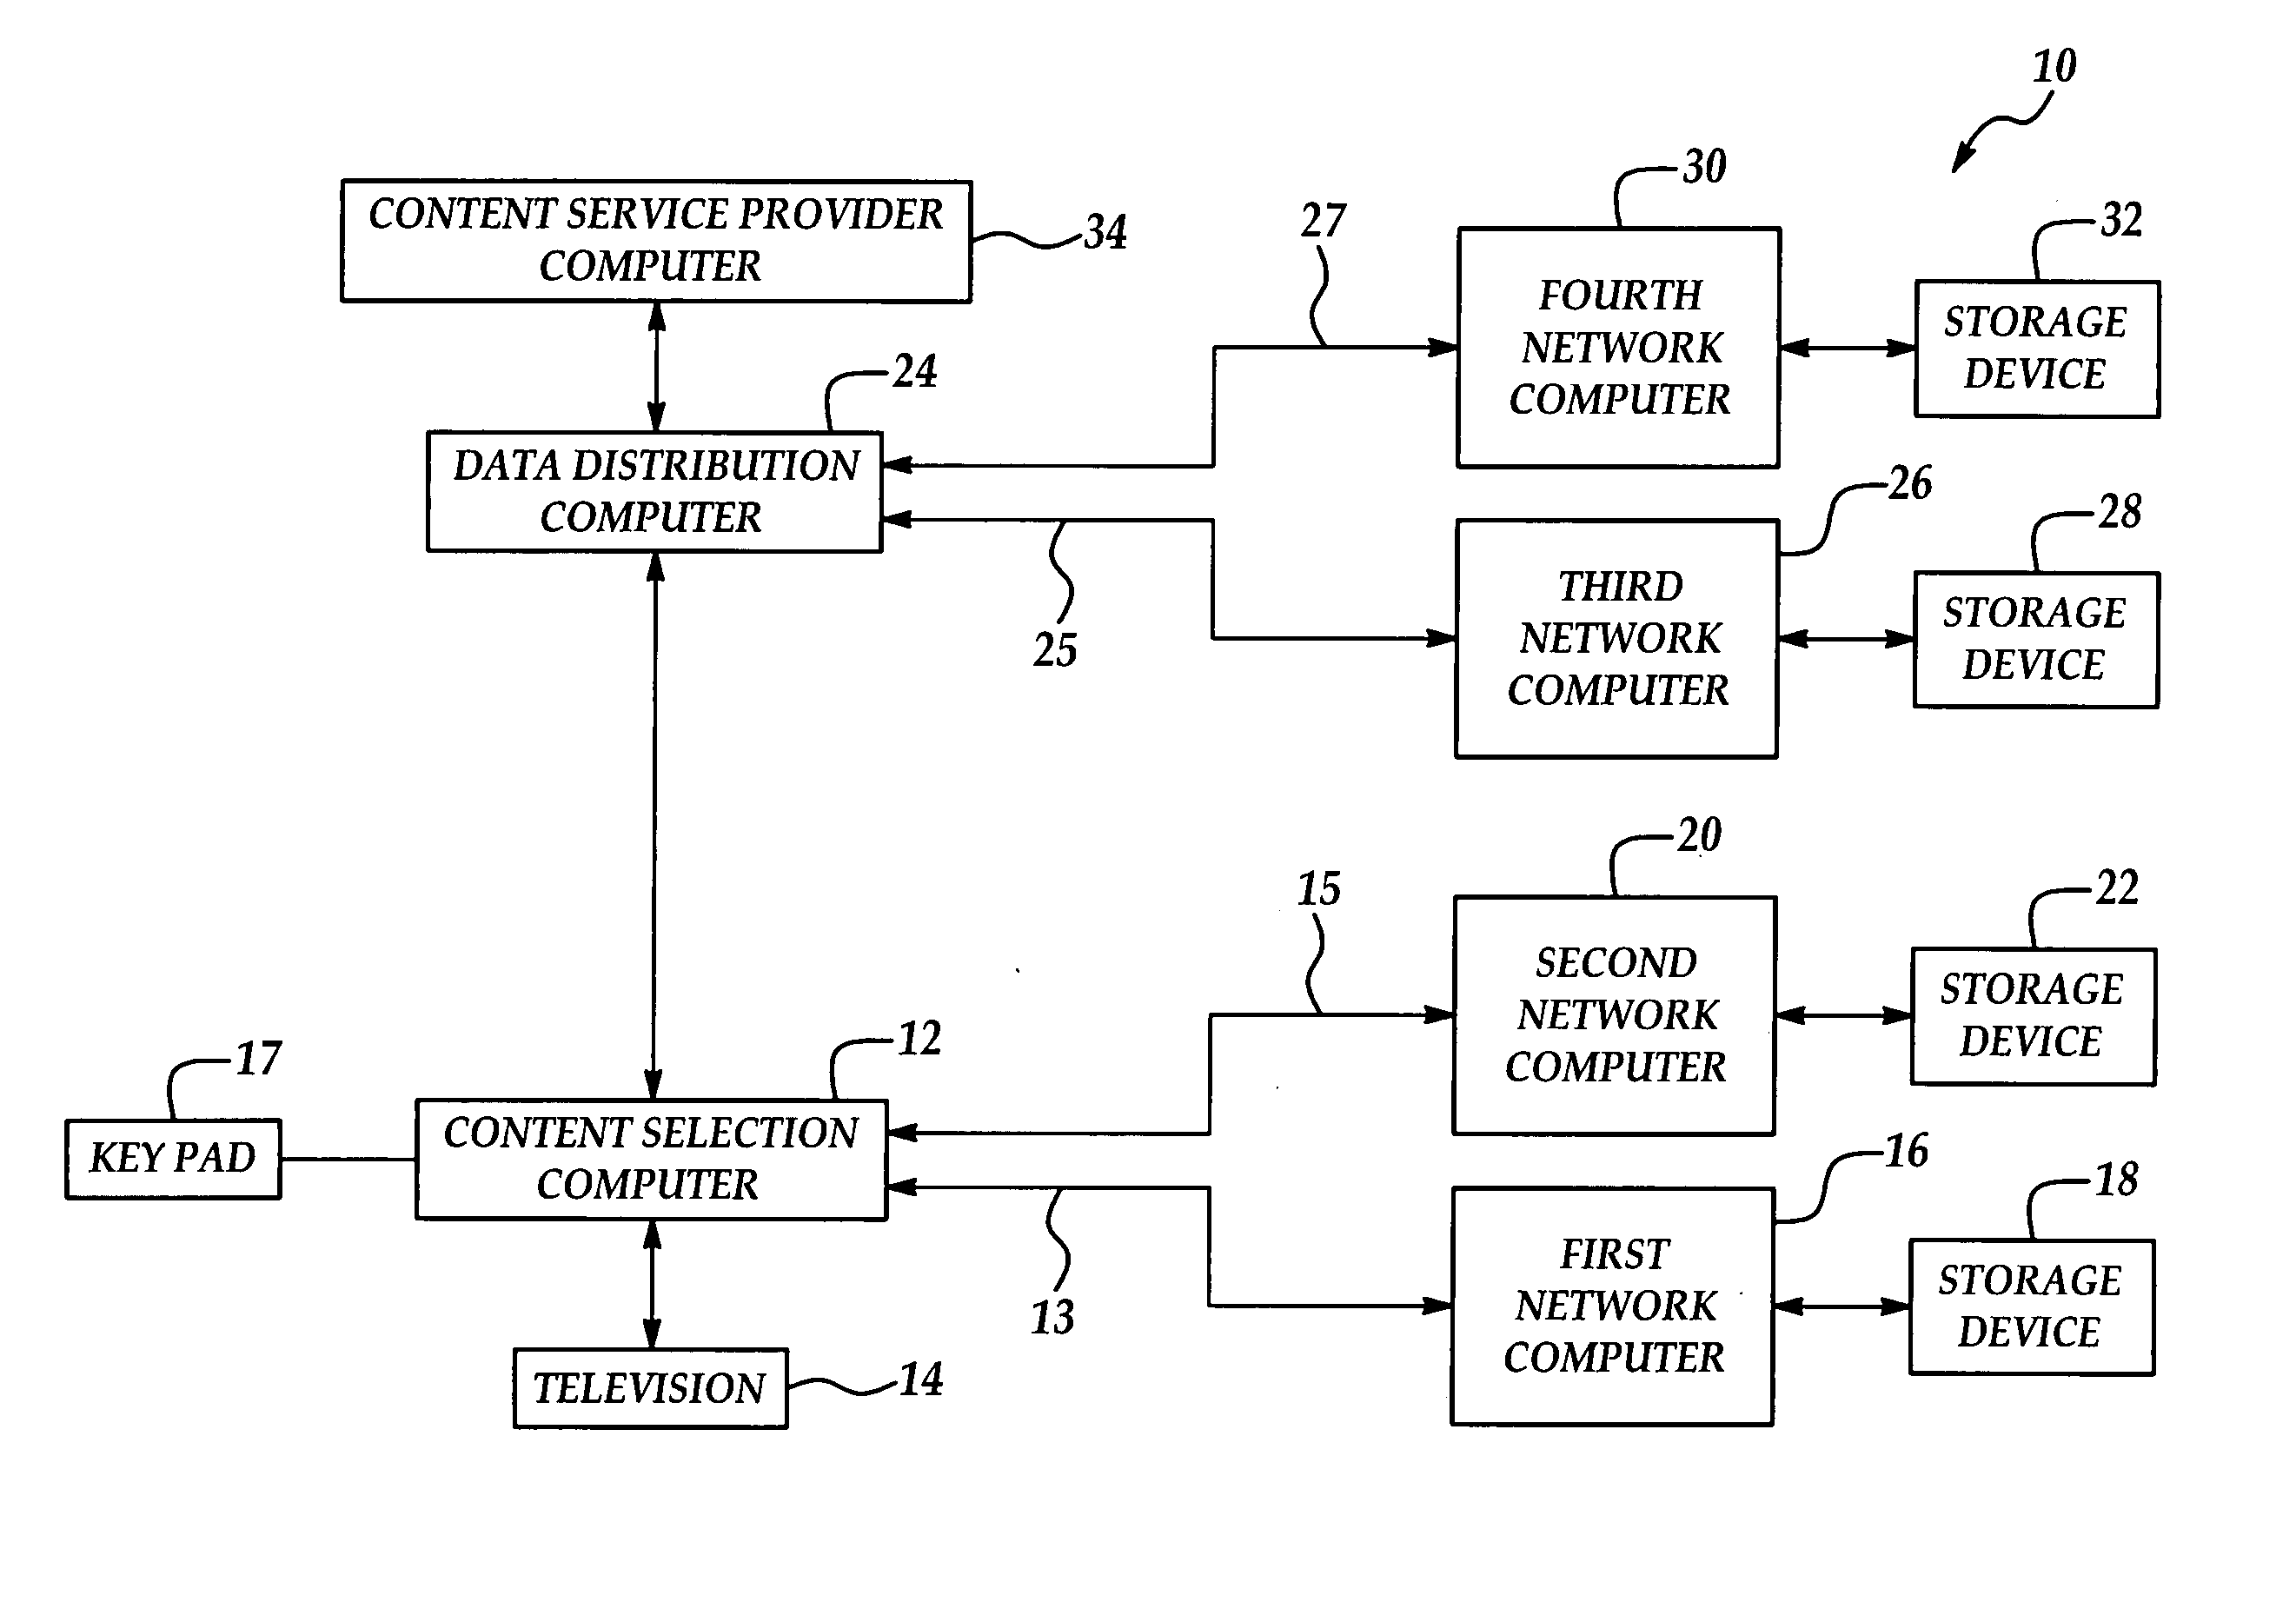 Systems, methods, and a storage medium for storing and securely transmitting digital media data